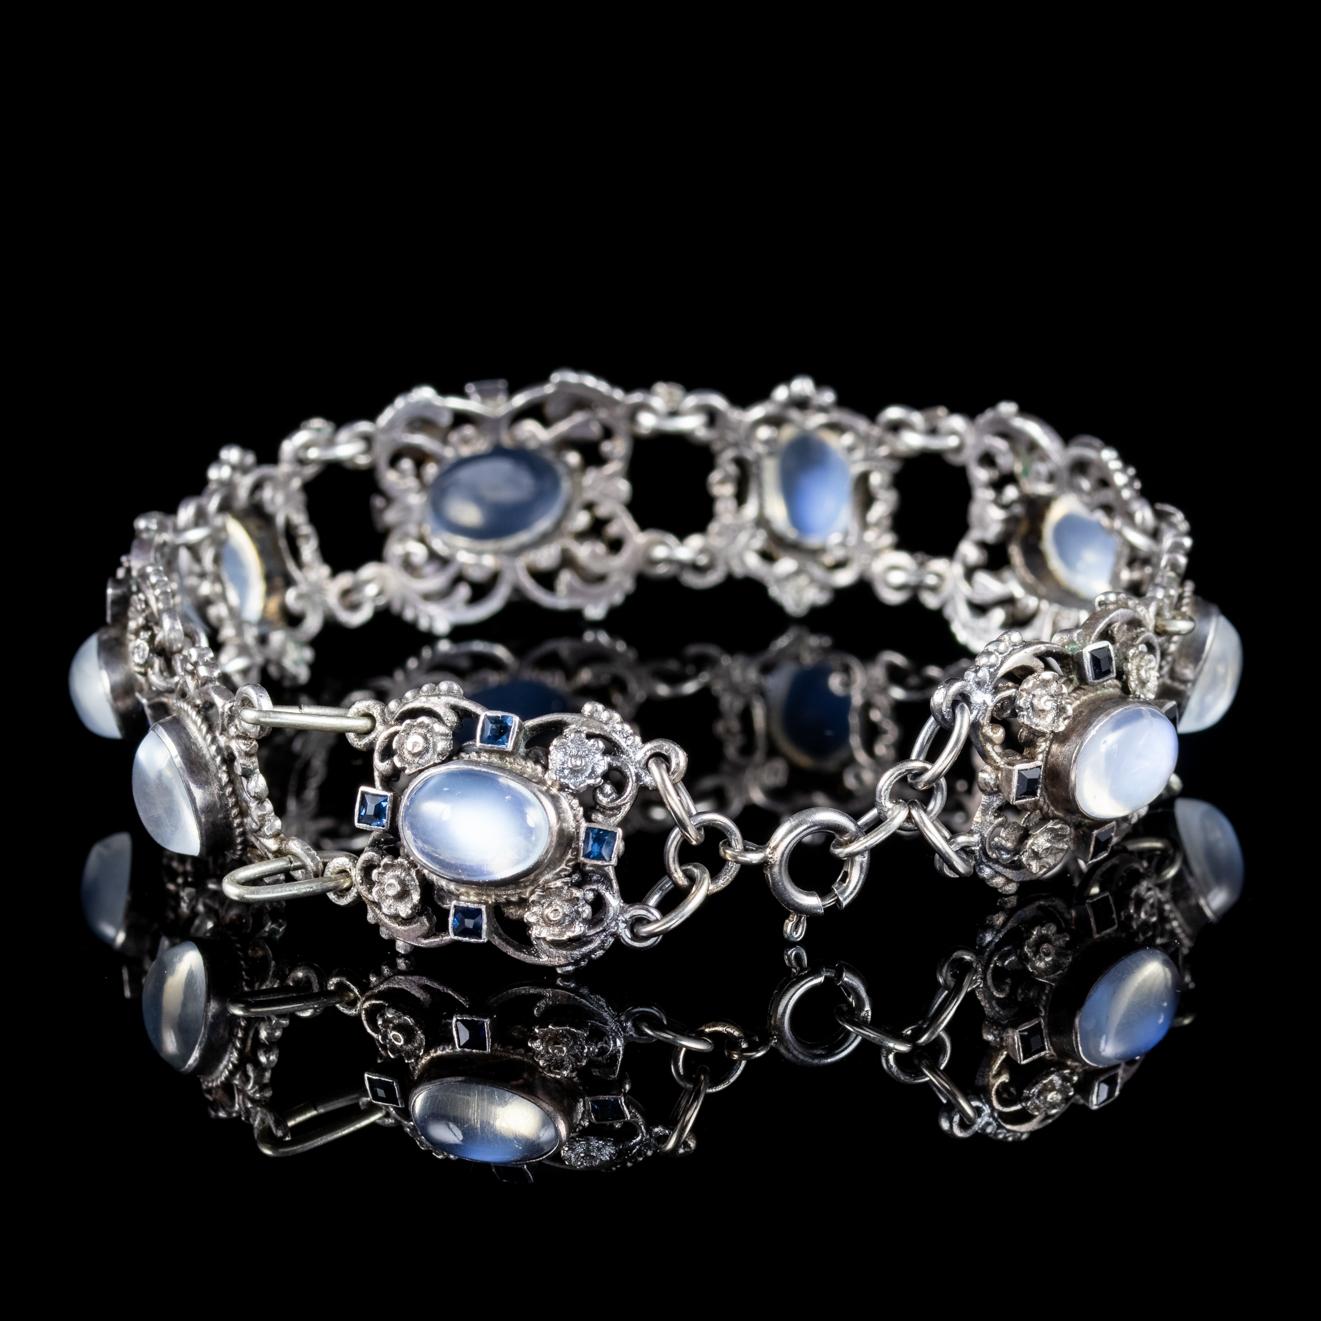 A beautiful antique Arts and Crafts bracelet decorated with Moonstones and halos of blue Paste Stones. The Arts and Crafts movement advocated a revival of traditional handicrafts in the late 19th century and used romantic, folk decoration with an